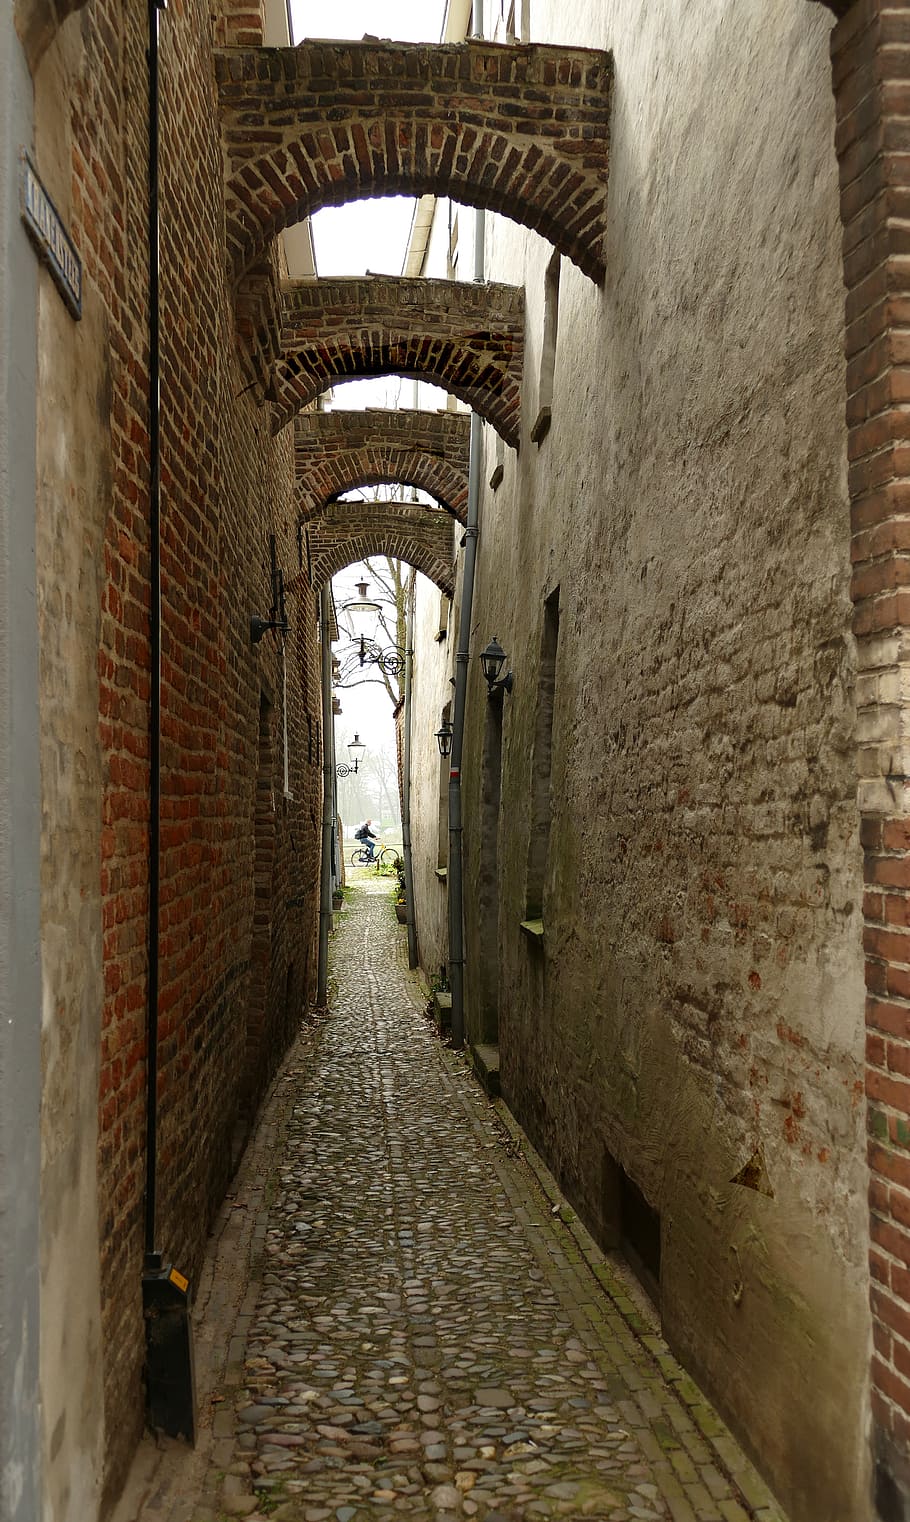 rose, passage, corridor, narrow, arc, wall, bicycle, cyclist, street, connection